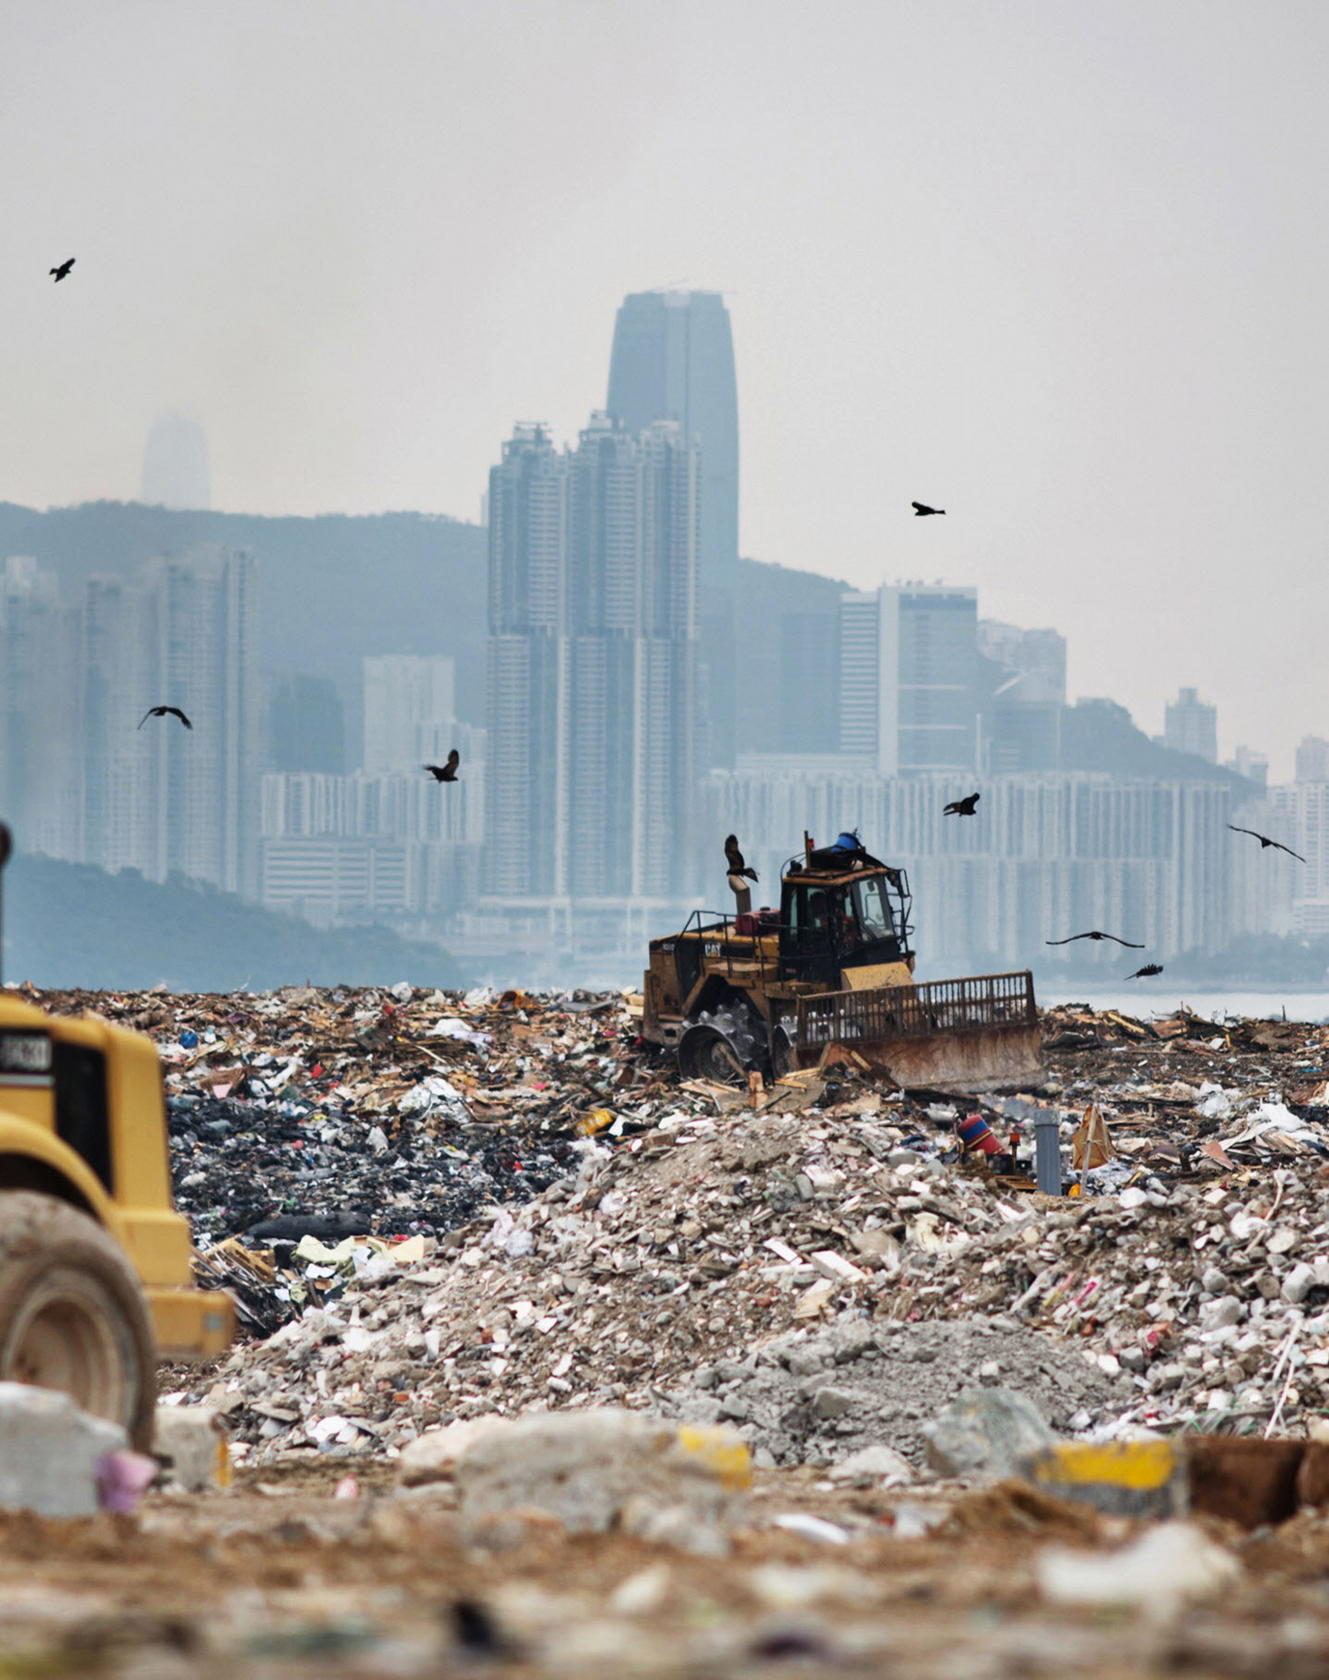 All three landfill sites in the New Territories will be full by 2019, according to a 2013 report by the EPD. Photo: Bloomberg